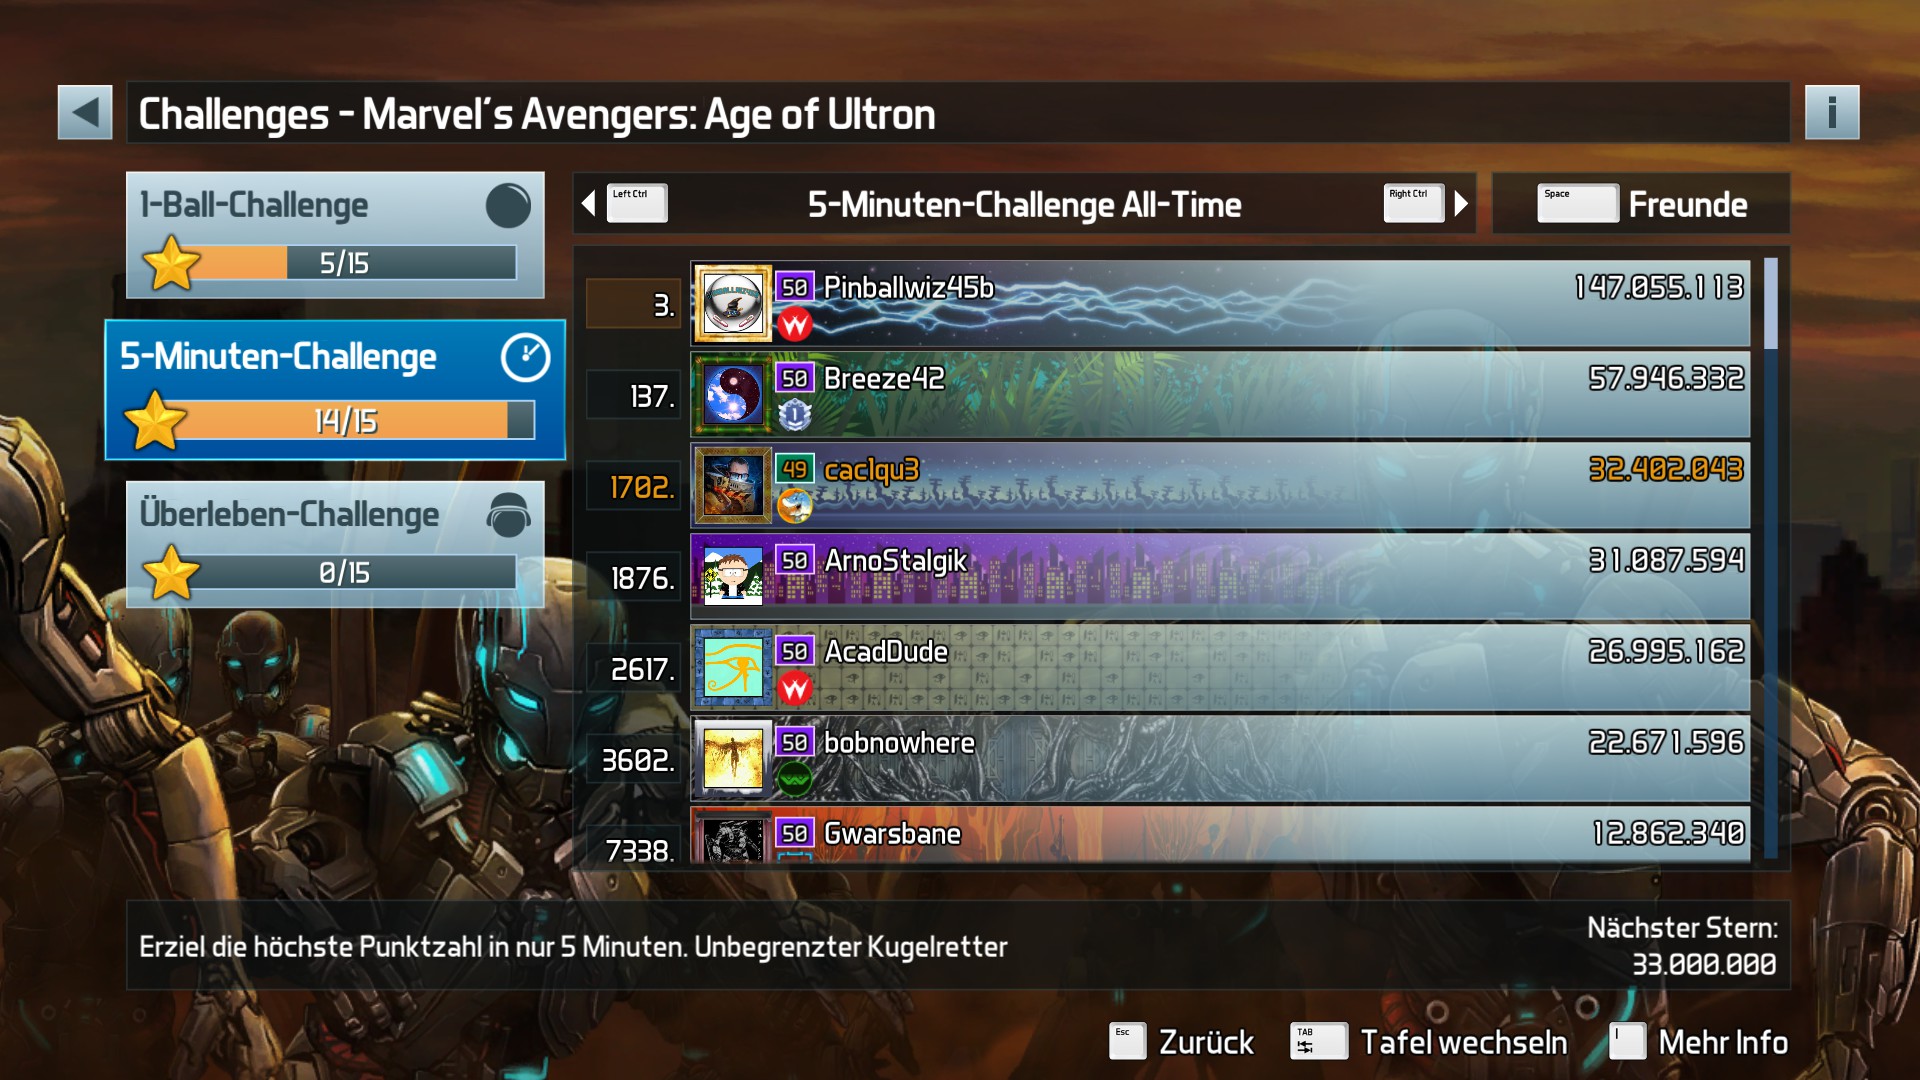 e2e4: Pinball FX3: Marvel’s Avengers: Age Of Ultron [5 Minute] (PC) 32,402,043 points on 2022-06-13 03:14:25